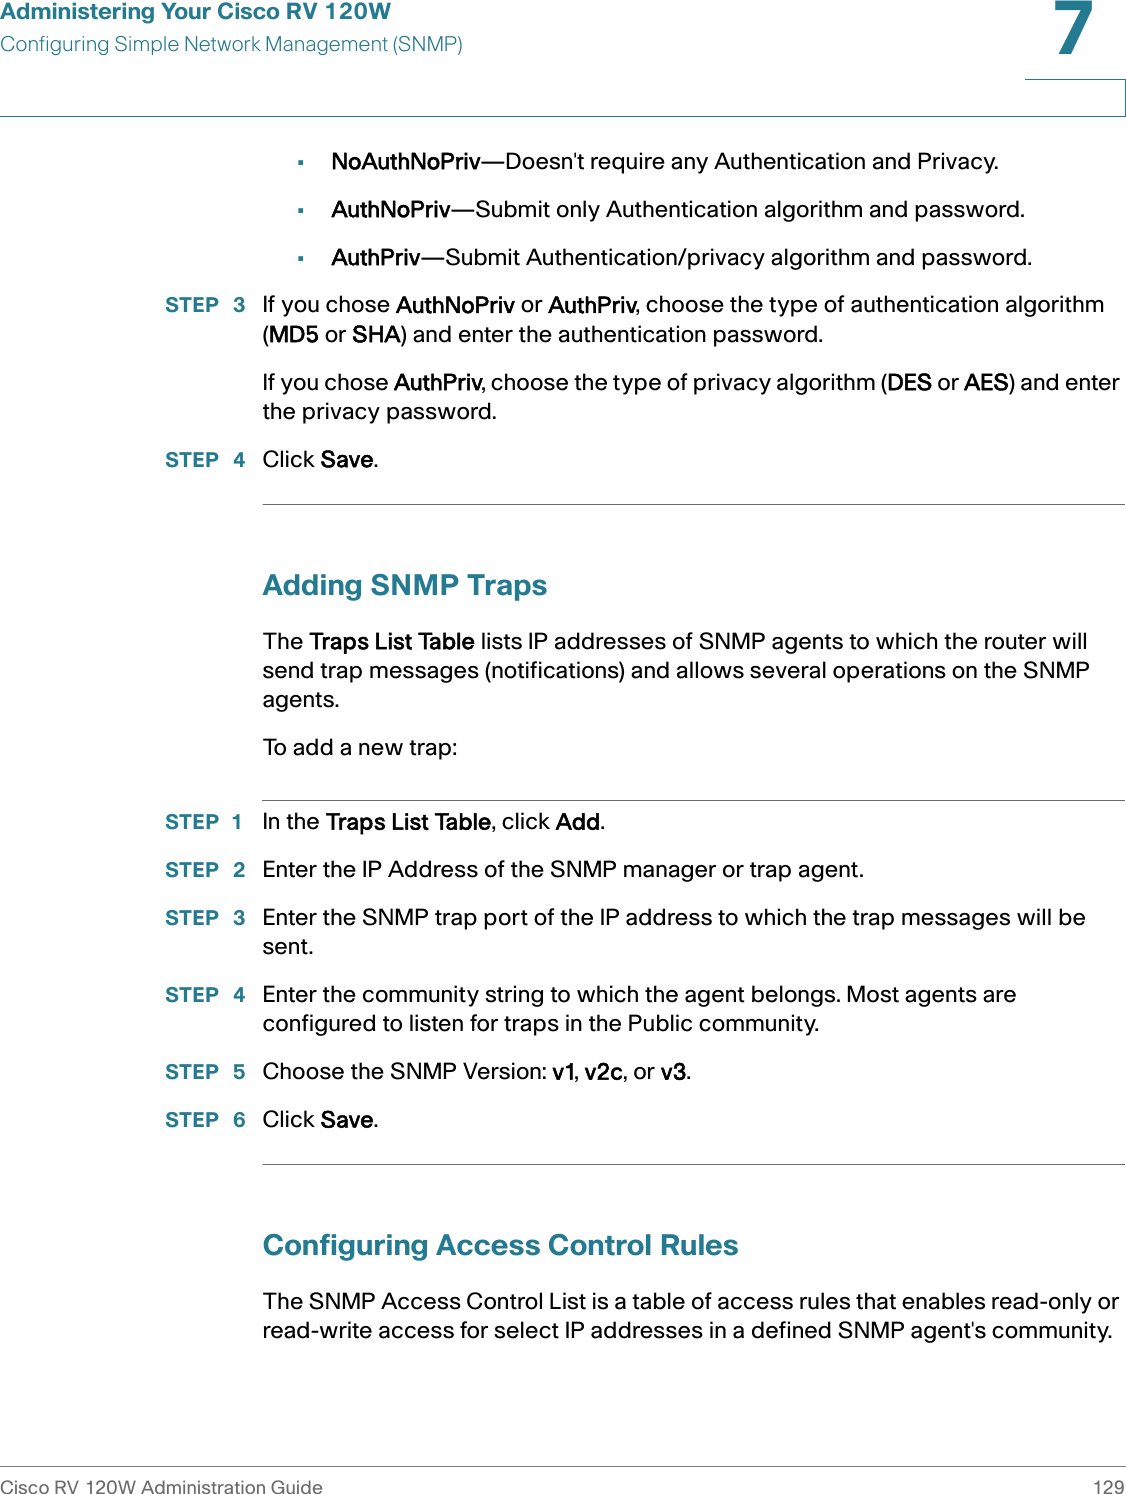 Administering Your Cisco RV 120WConfiguring Simple Network Management (SNMP)Cisco RV 120W Administration Guide 1297 •NoAuthNoPriv—Doesn&apos;t require any Authentication and Privacy.•AuthNoPriv—Submit only Authentication algorithm and password.•AuthPriv—Submit Authentication/privacy algorithm and password.STEP  3 If you chose AuthNoPriv or AuthPriv, choose the type of authentication algorithm (MD5 or SHA) and enter the authentication password.If you chose AuthPriv, choose the type of privacy algorithm (DES or AES) and enter the privacy password.STEP  4 Click Save.Adding SNMP TrapsThe Traps List Table lists IP addresses of SNMP agents to which the router will send trap messages (notifications) and allows several operations on the SNMP agents.To add a new trap:STEP 1 In the Traps List Table, click Add.STEP  2 Enter the IP Address of the SNMP manager or trap agent. STEP  3 Enter the SNMP trap port of the IP address to which the trap messages will be sent. STEP  4 Enter the community string to which the agent belongs. Most agents are configured to listen for traps in the Public community. STEP  5 Choose the SNMP Version: v1, v2c, or v3.STEP  6 Click Save.Configuring Access Control RulesThe SNMP Access Control List is a table of access rules that enables read-only or read-write access for select IP addresses in a defined SNMP agent&apos;s community. 